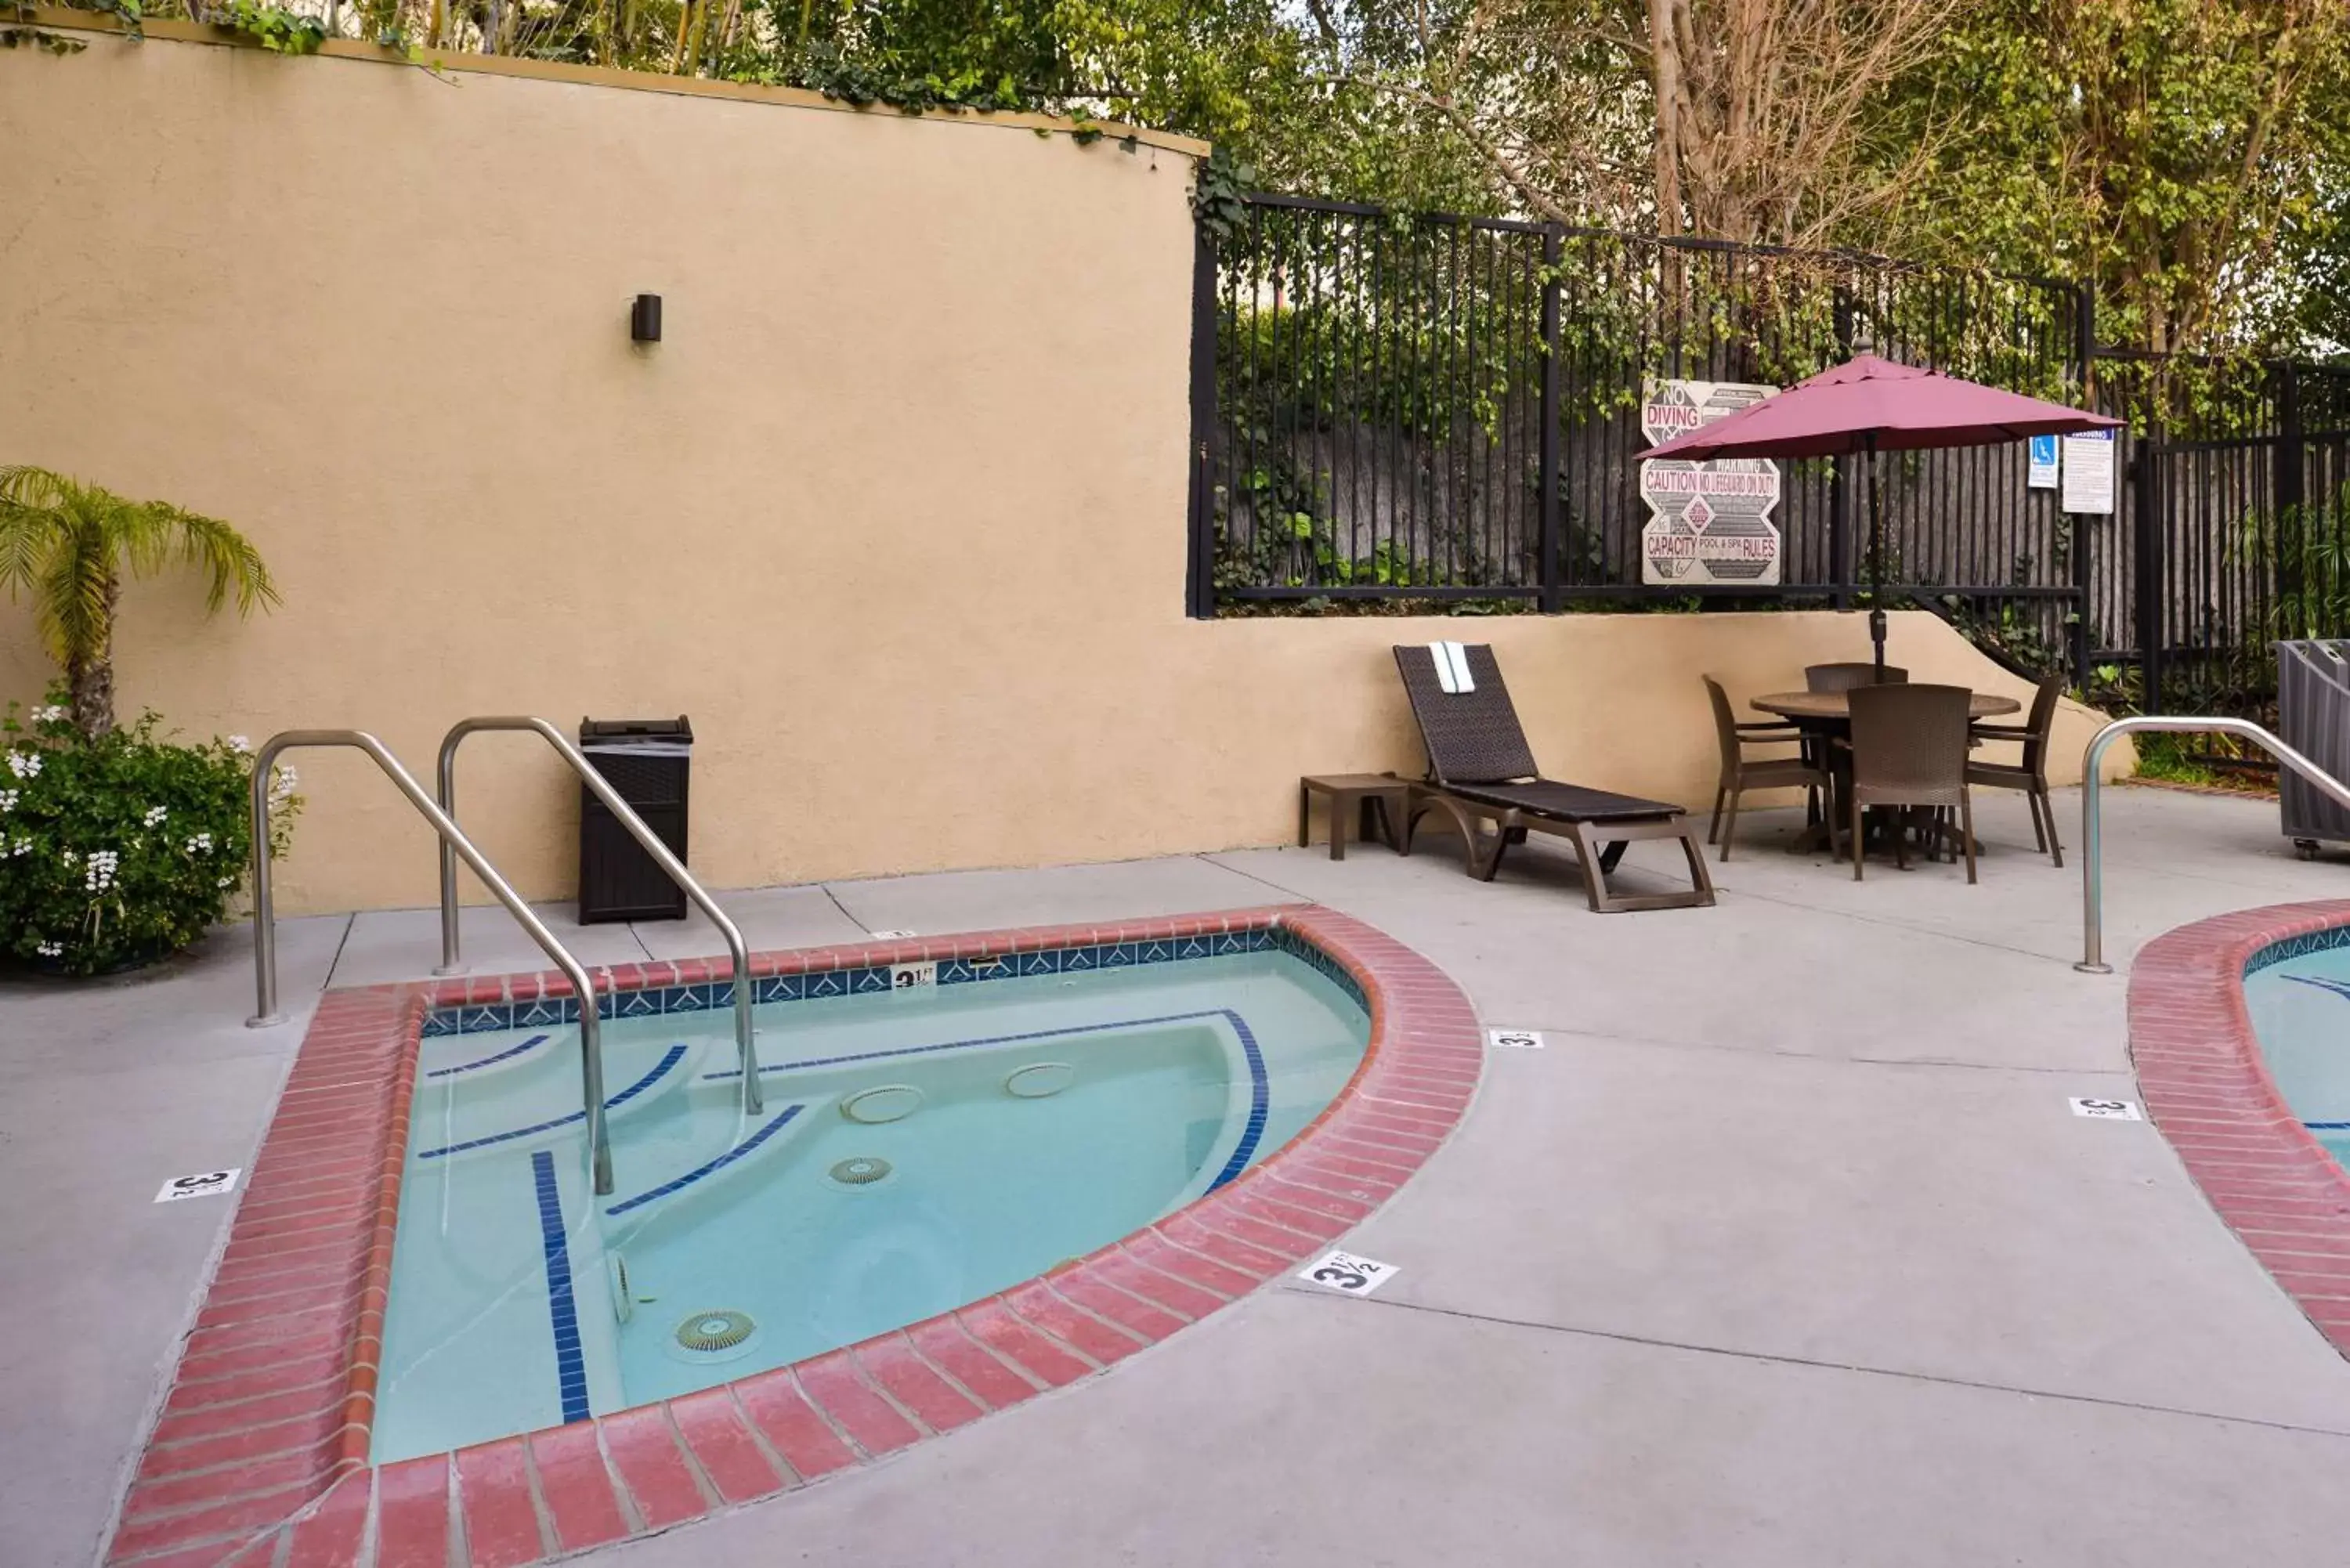 On site, Swimming Pool in Best Western Hollywood Plaza Inn Hotel - Hollywood Walk of Fame LA